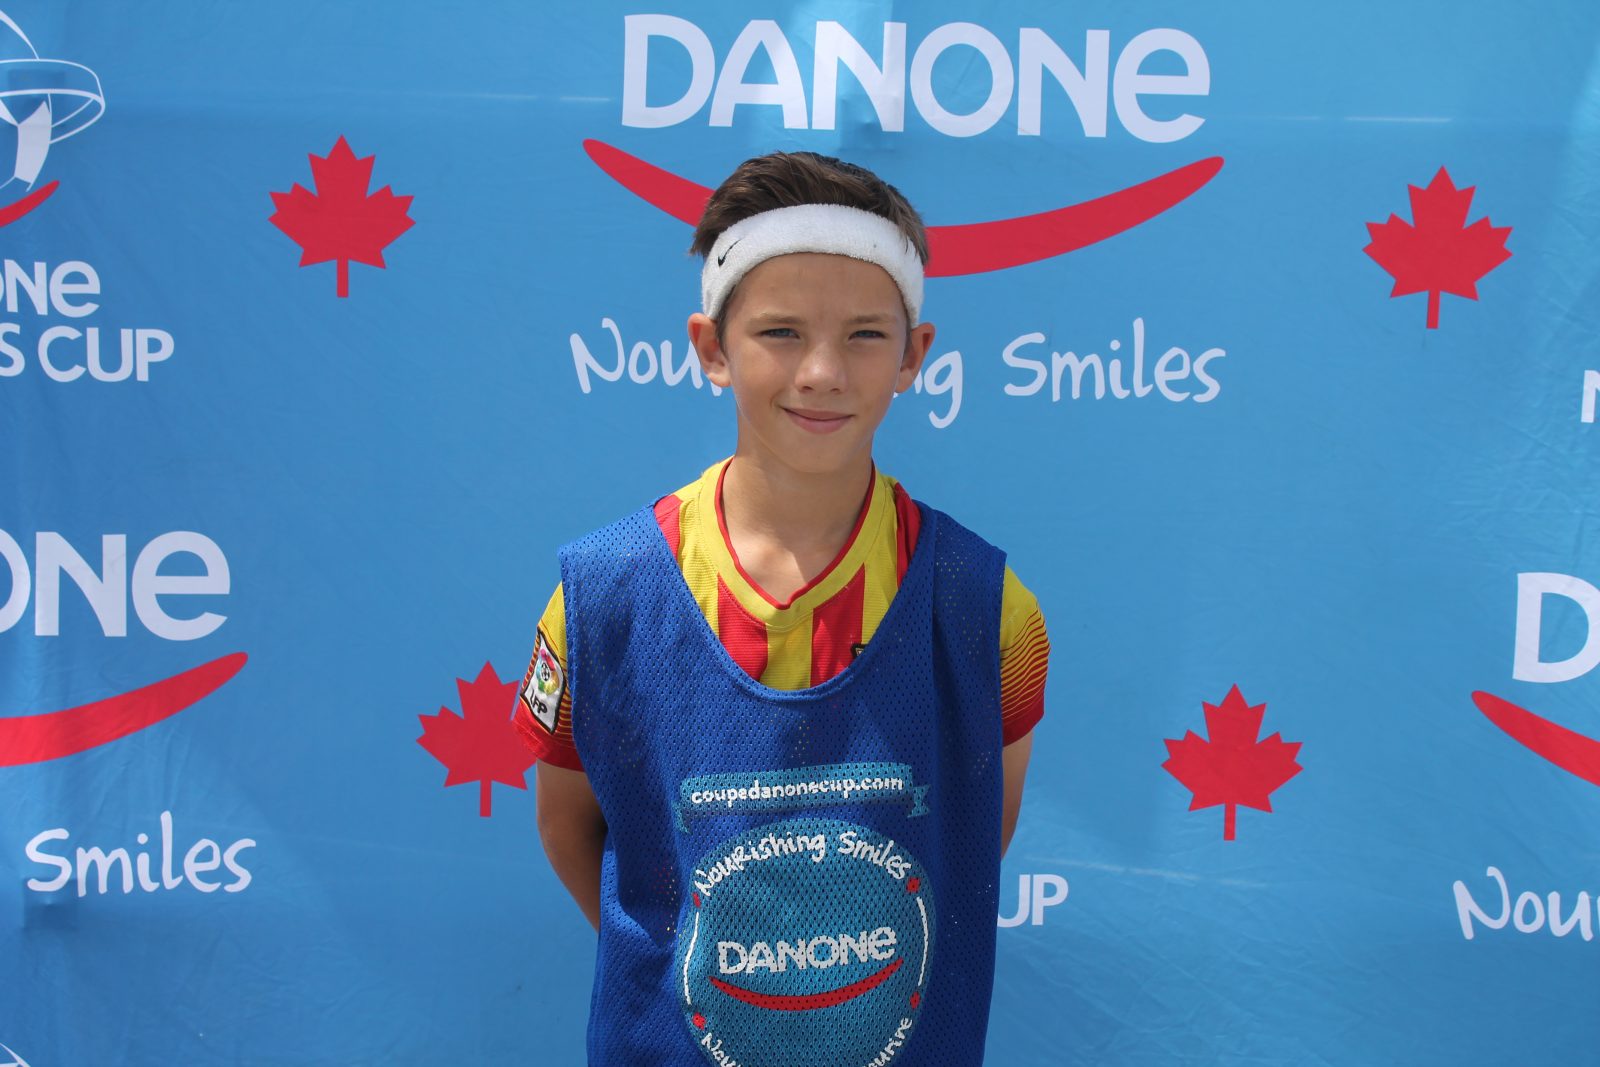 Cornwall youth to captain Team Canada at Danone Nations Cup